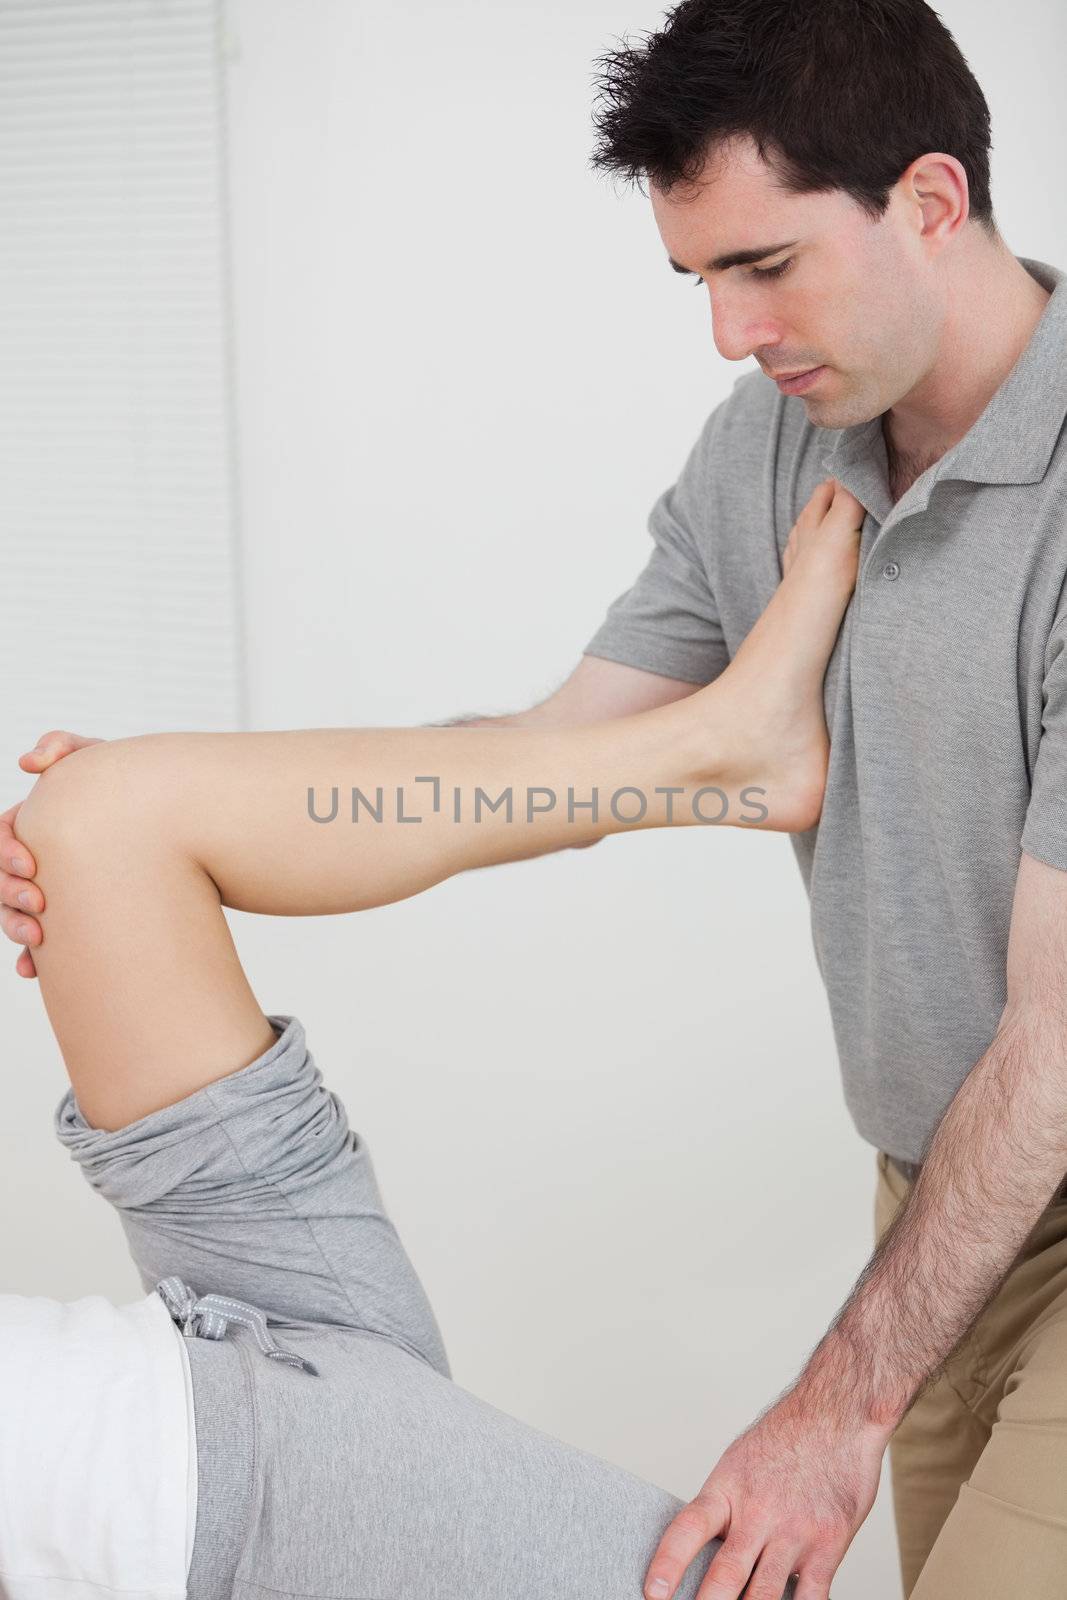 Physiotherapist stretching a leg while placed it on his chest by Wavebreakmedia